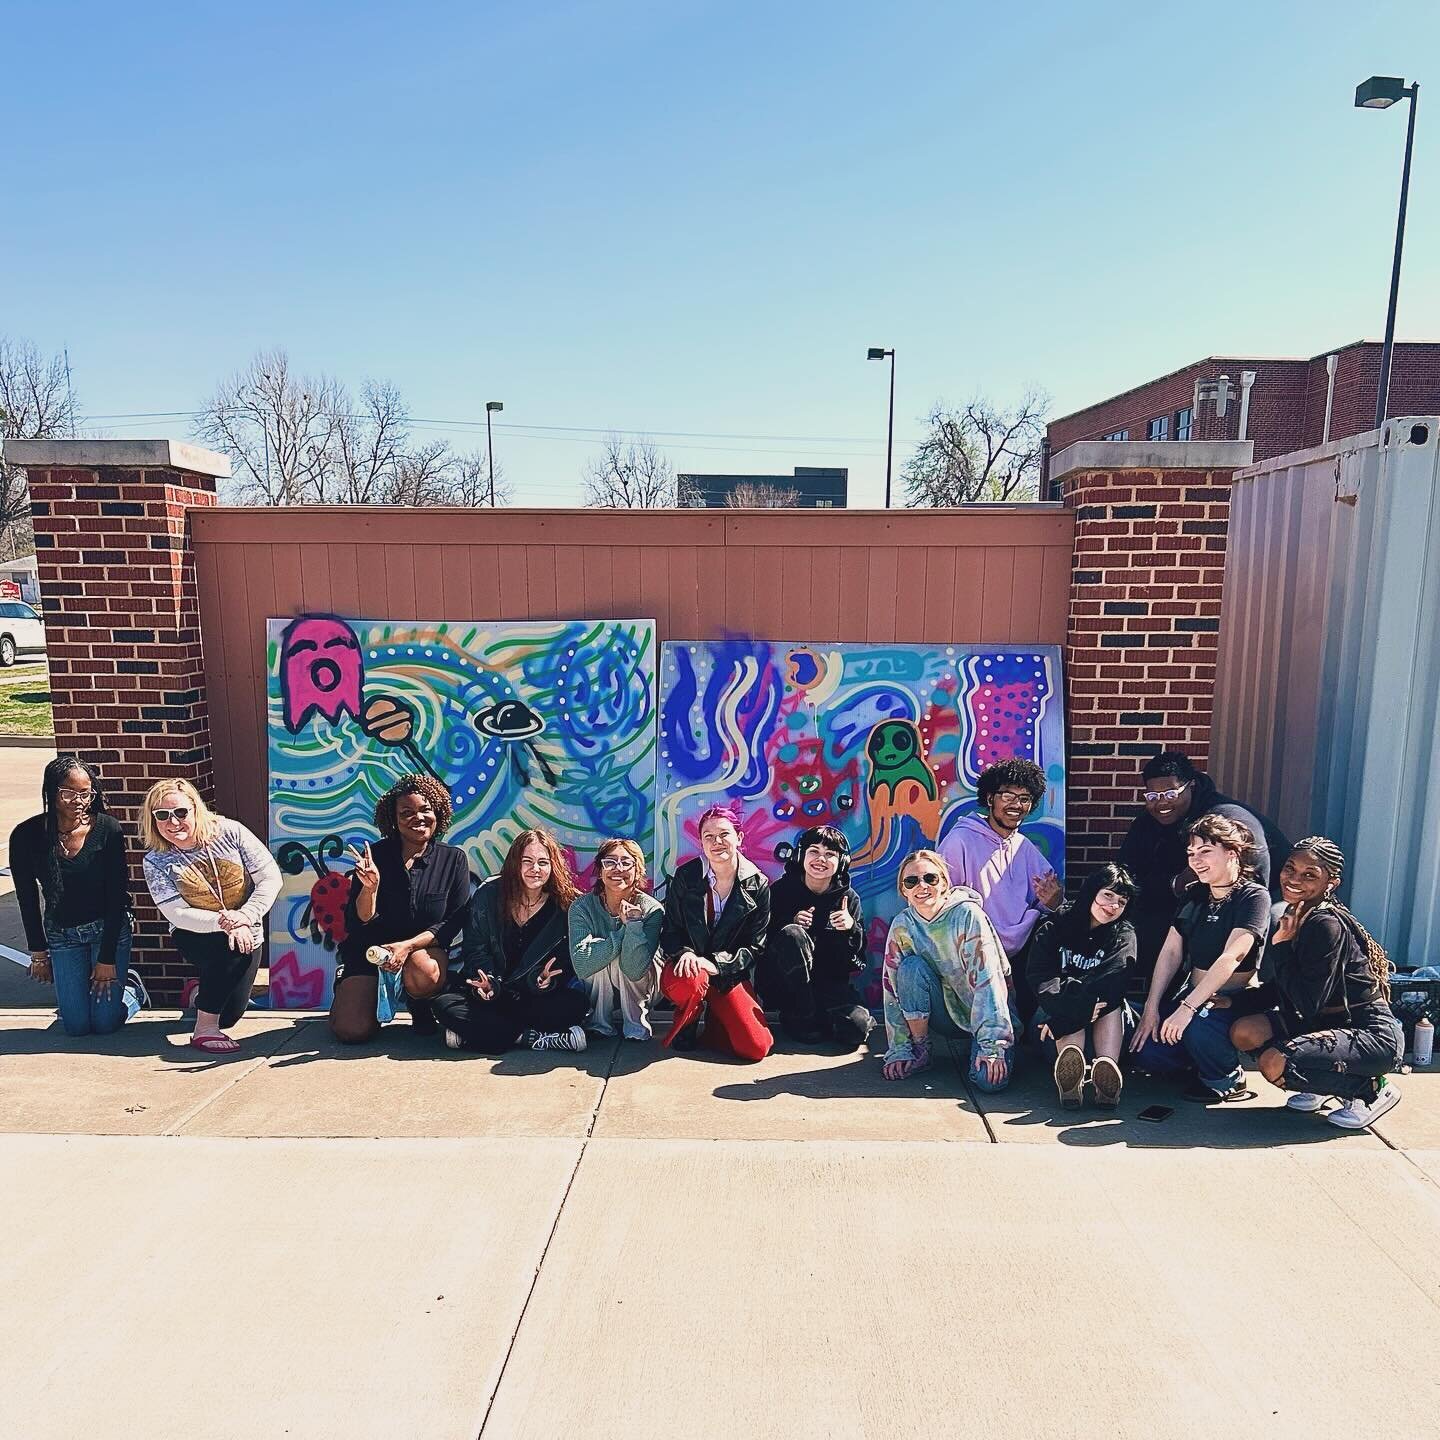 Thanks to @virginiasitzes &amp; @savannah.b.whitehead for having me be a part of @edmondfinearts &ldquo;Mural Makers&rdquo; program 🎨🩷

@edmondfinearts partnered with the @oklahomaartscouncil, Edmond Visual Arts Commission, and @edmondschools to le